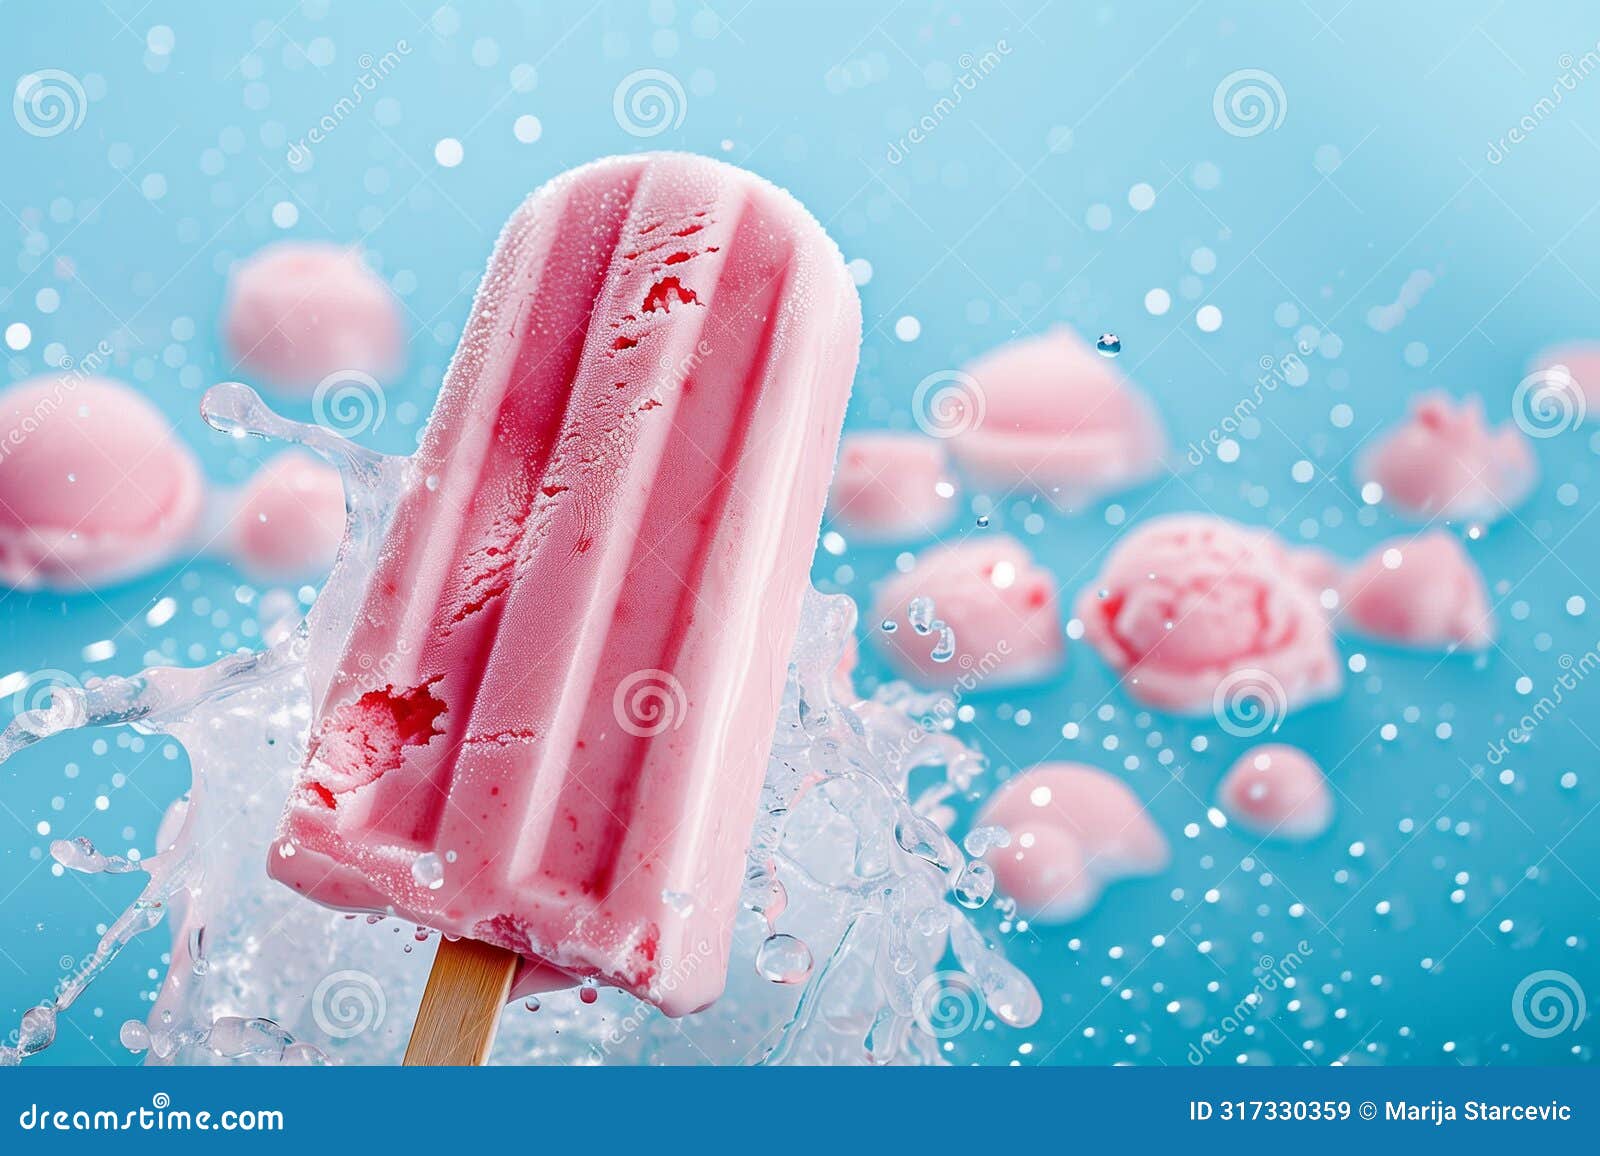 wierd home made strawbery ice cream on the stick  on a blue background